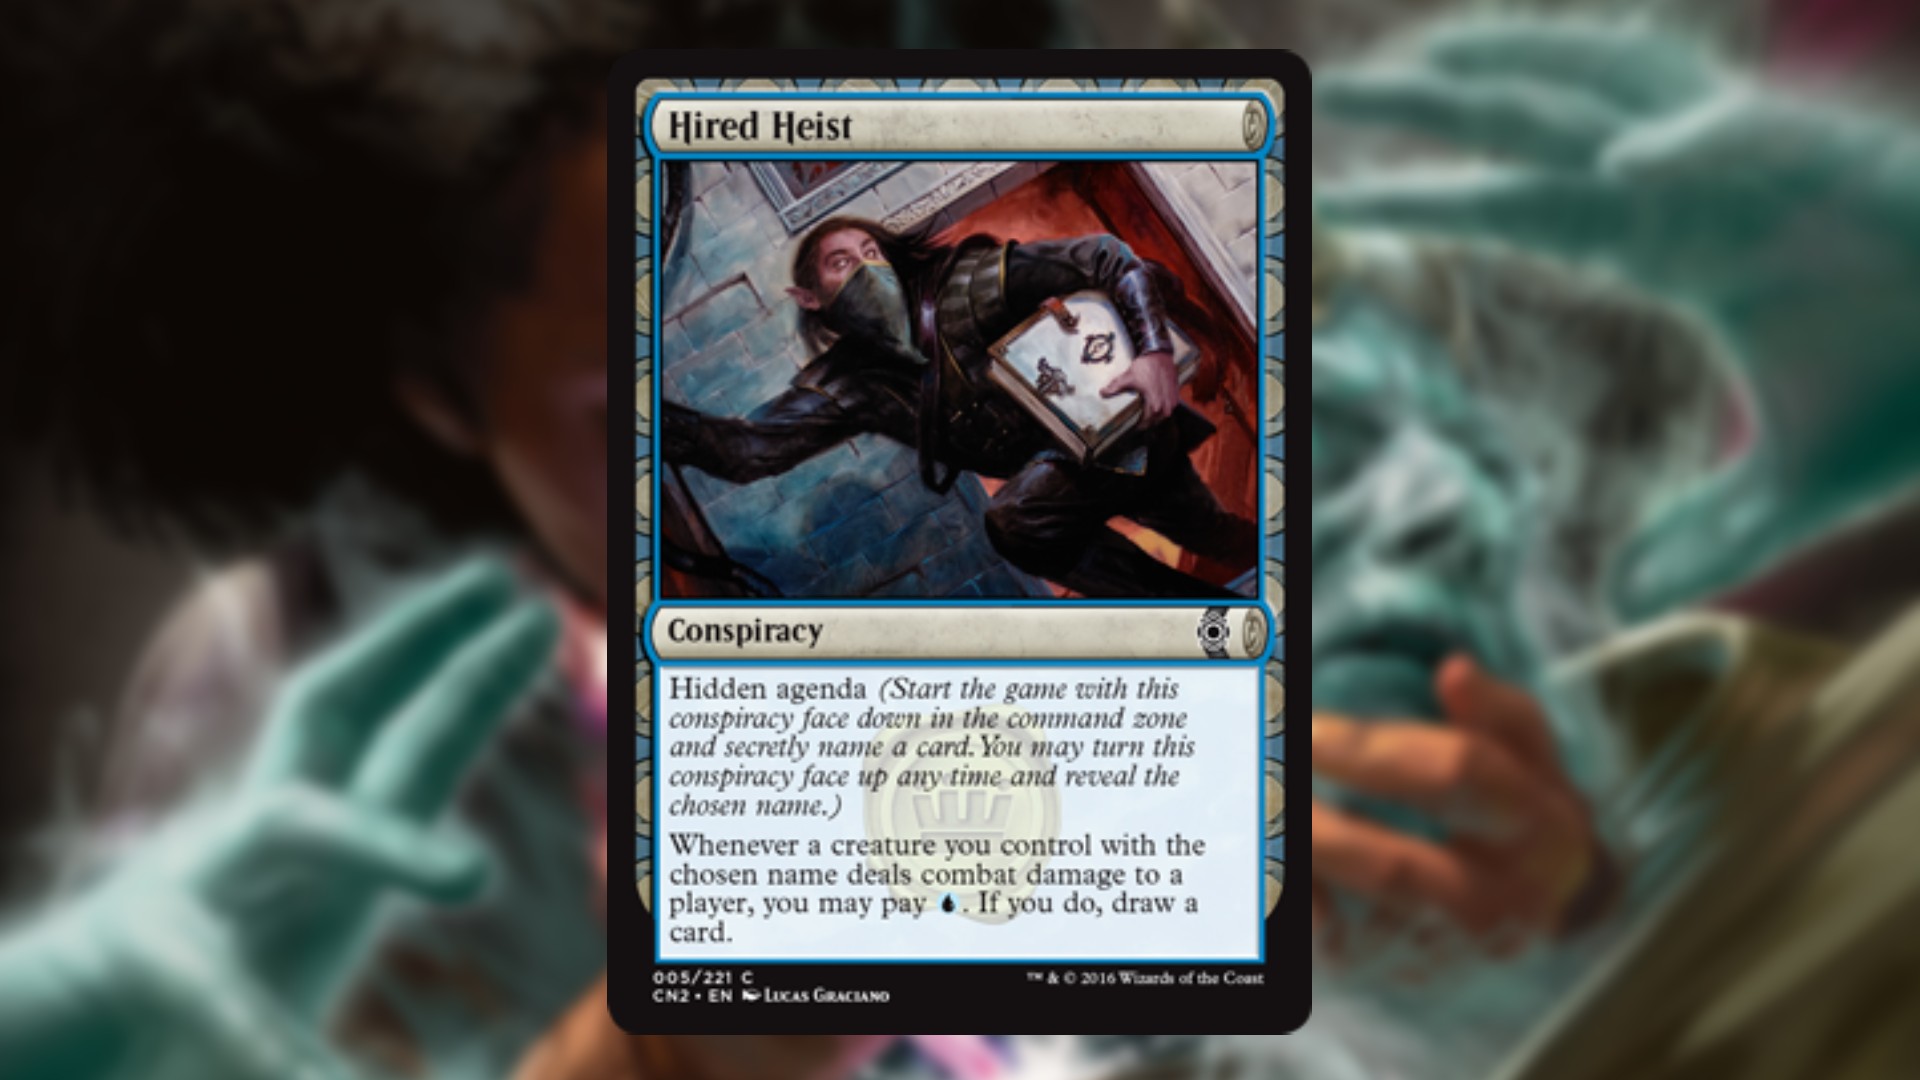 magic the gathering card in blue wirth a strange borded, and art depicting a face-mask wearing thief